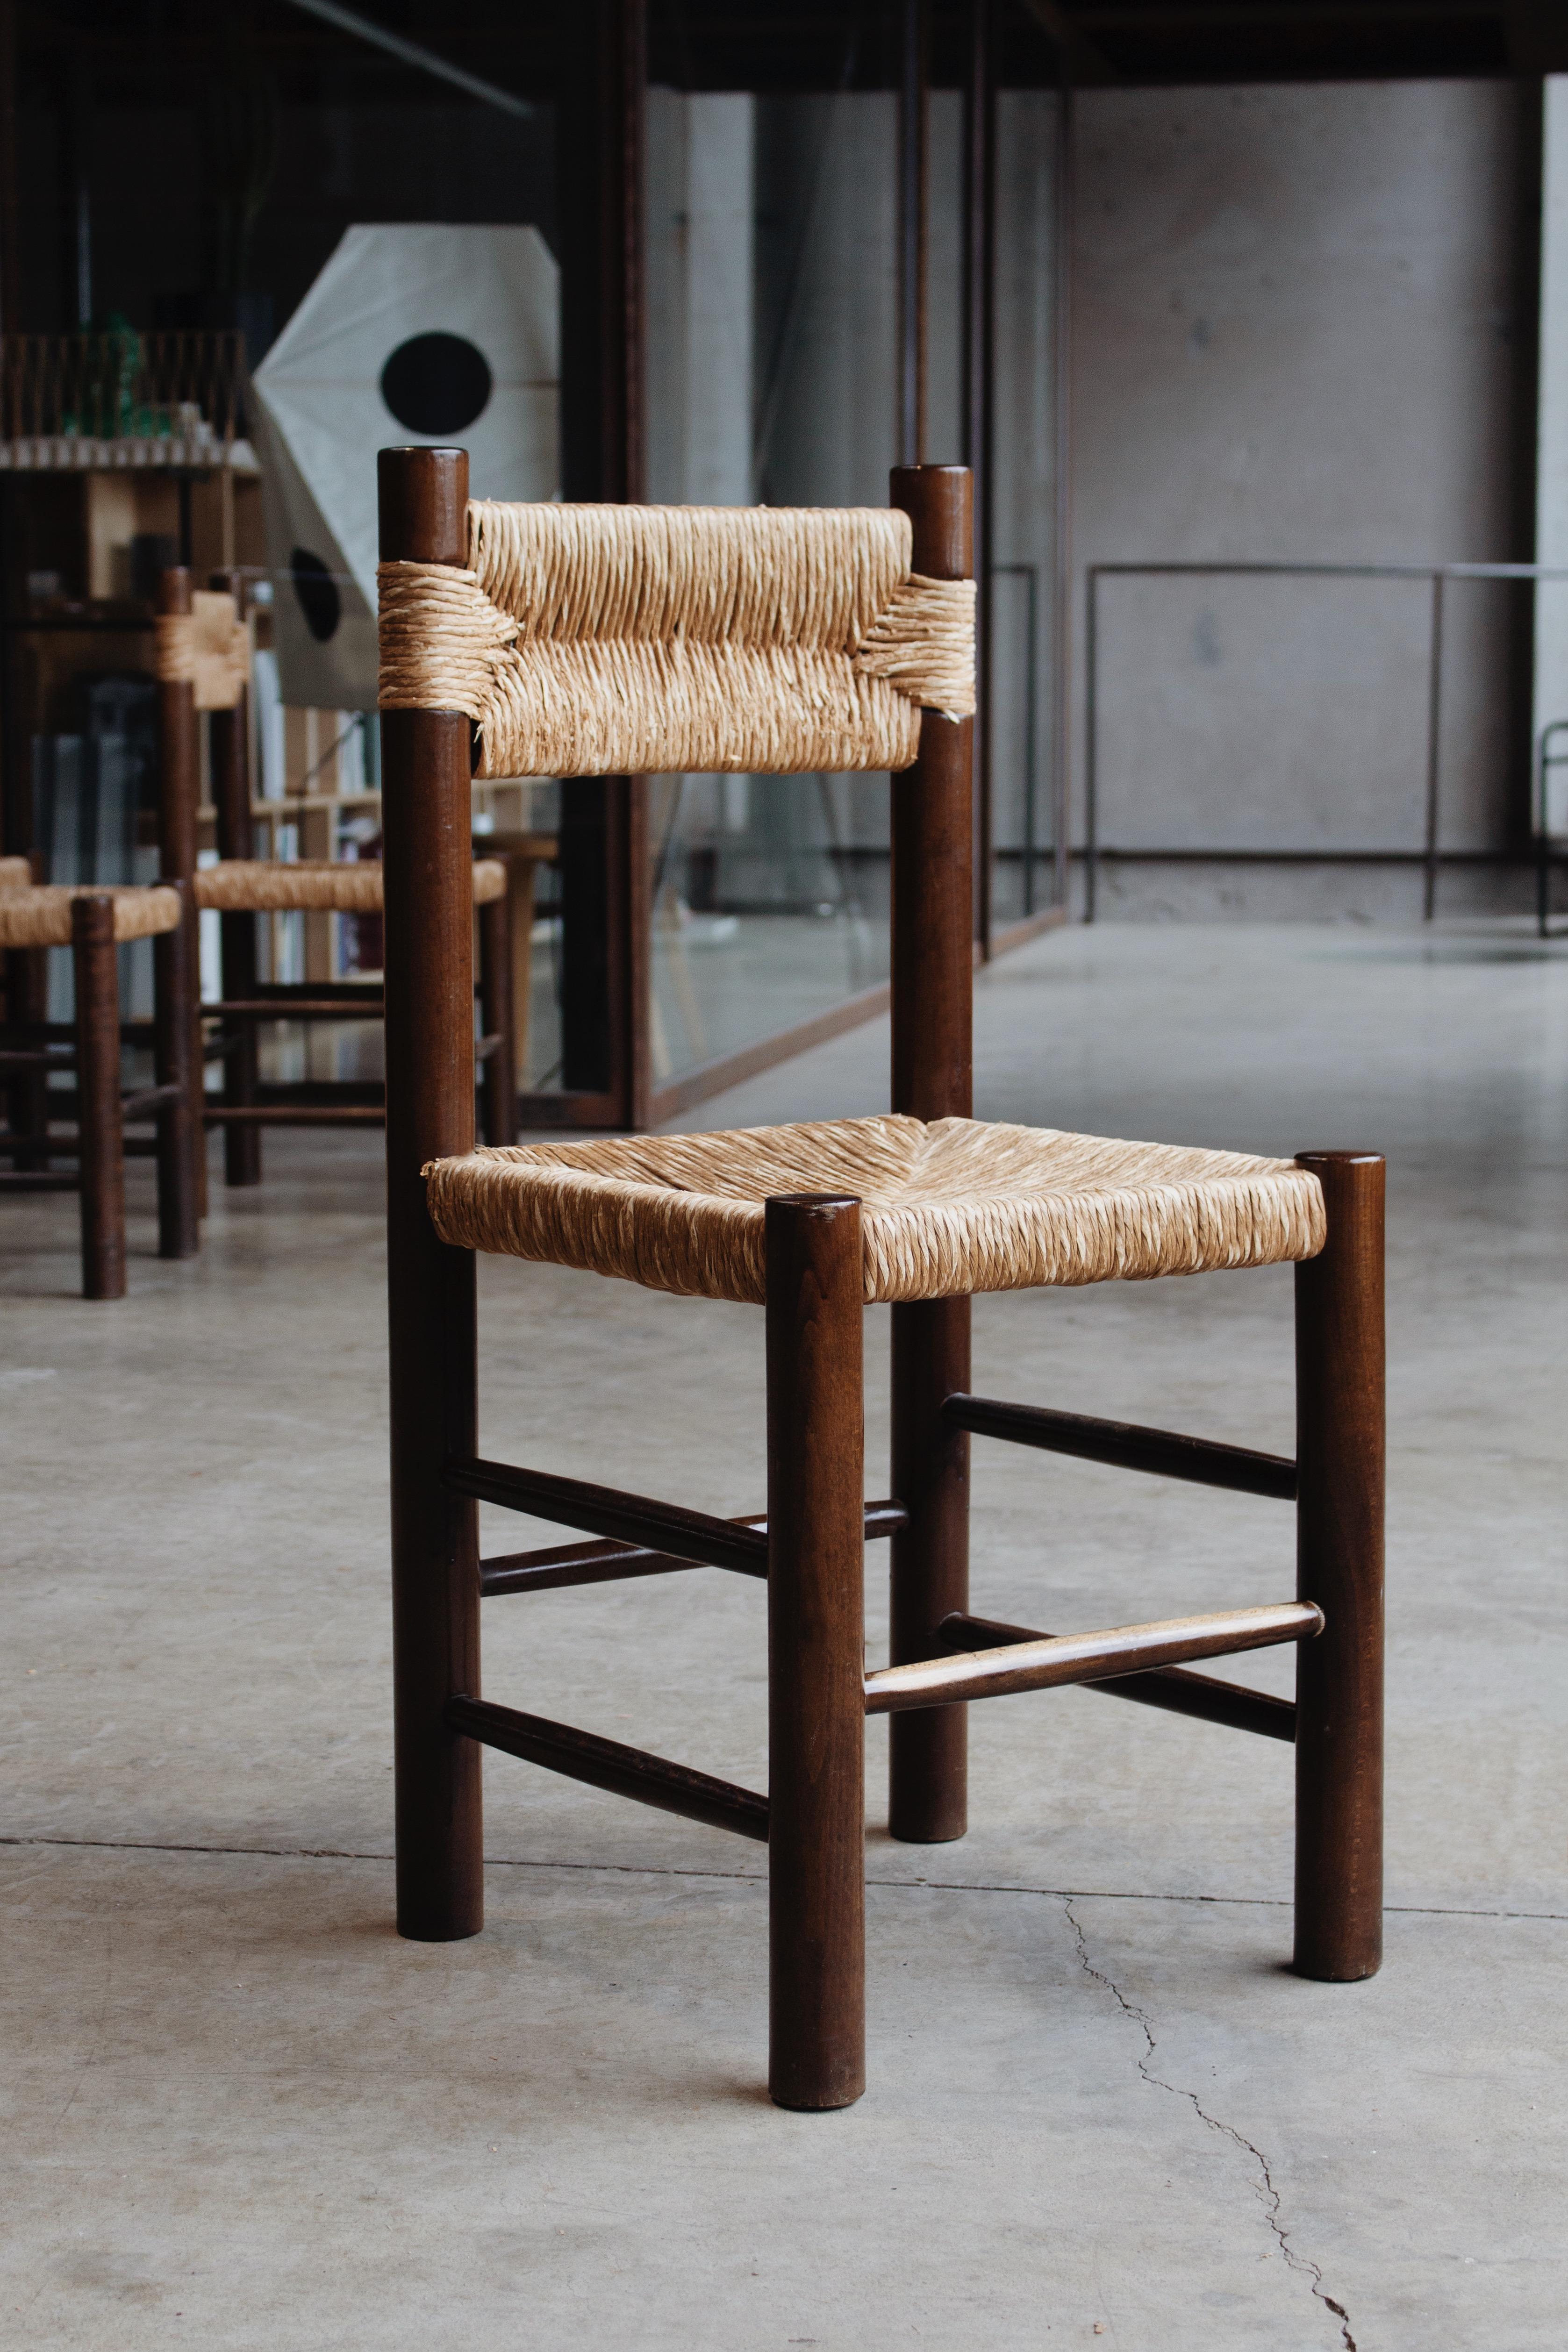 Charlotte Perriand Dining Chairs for Robert Sentou, straw and wood, France, 1964, set of four.
 
The chairs have a simple and timeless design. The fancy backrest and seat in straw combined with the pinewood structure form a truly balanced